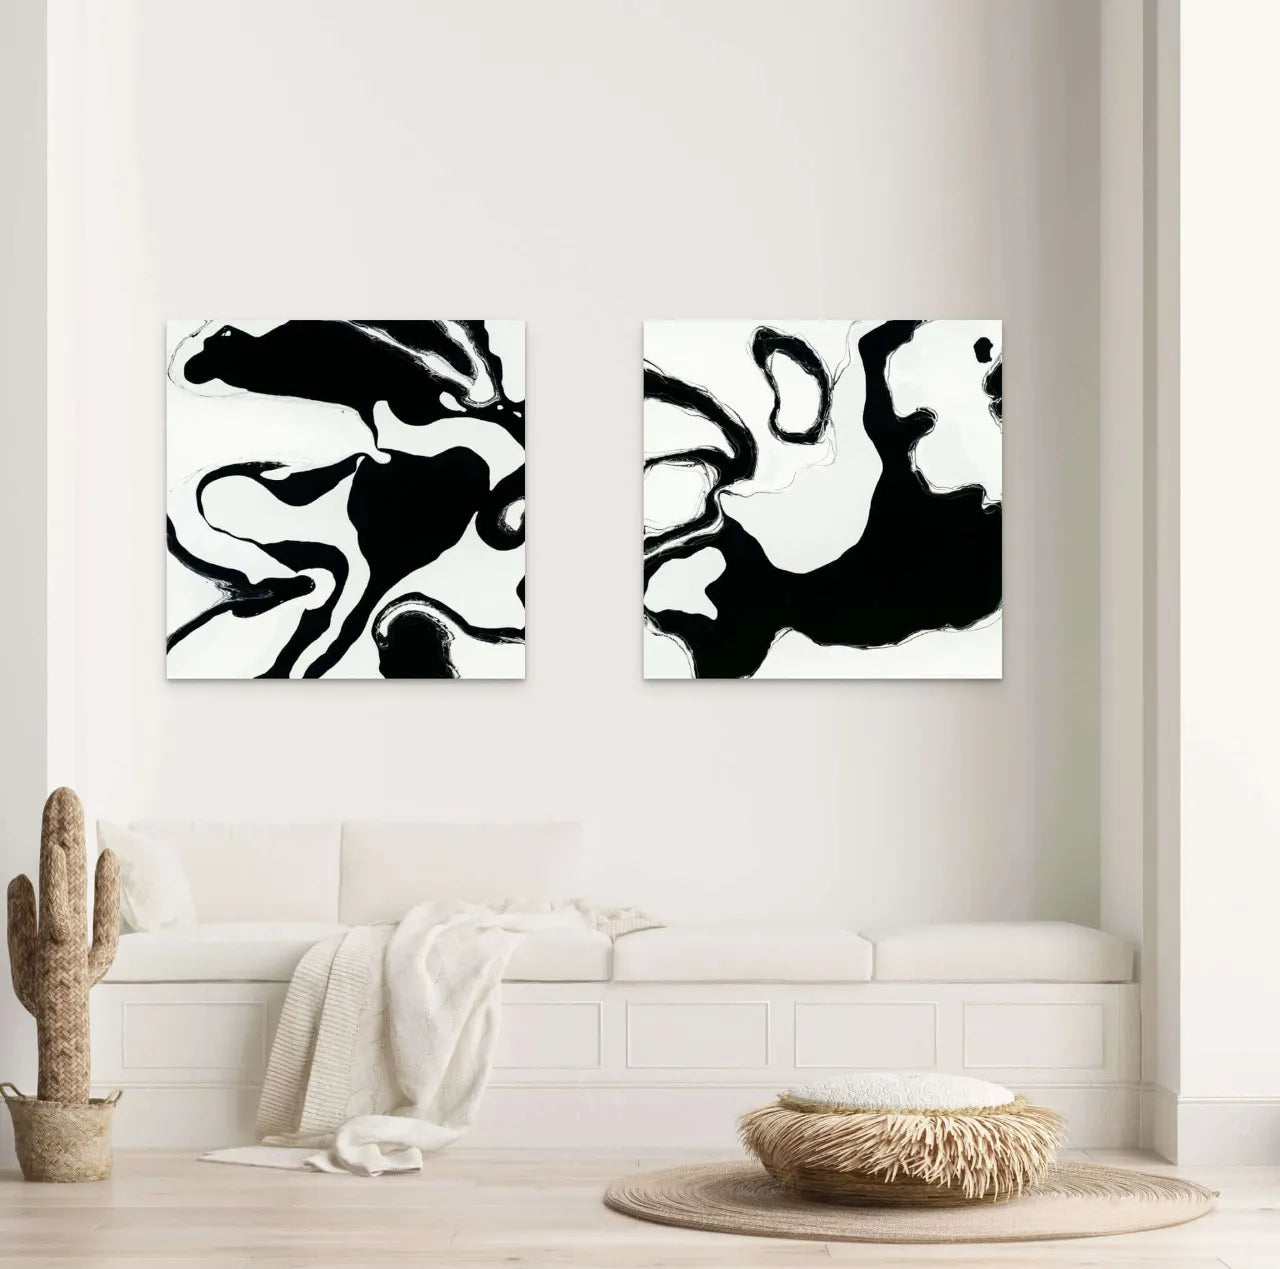    Abstract-Artwork-by-Sung-Lee-Nature-Series-Africa-1and2-Lounge-Room-Canvas-Limited-Edition-Prints